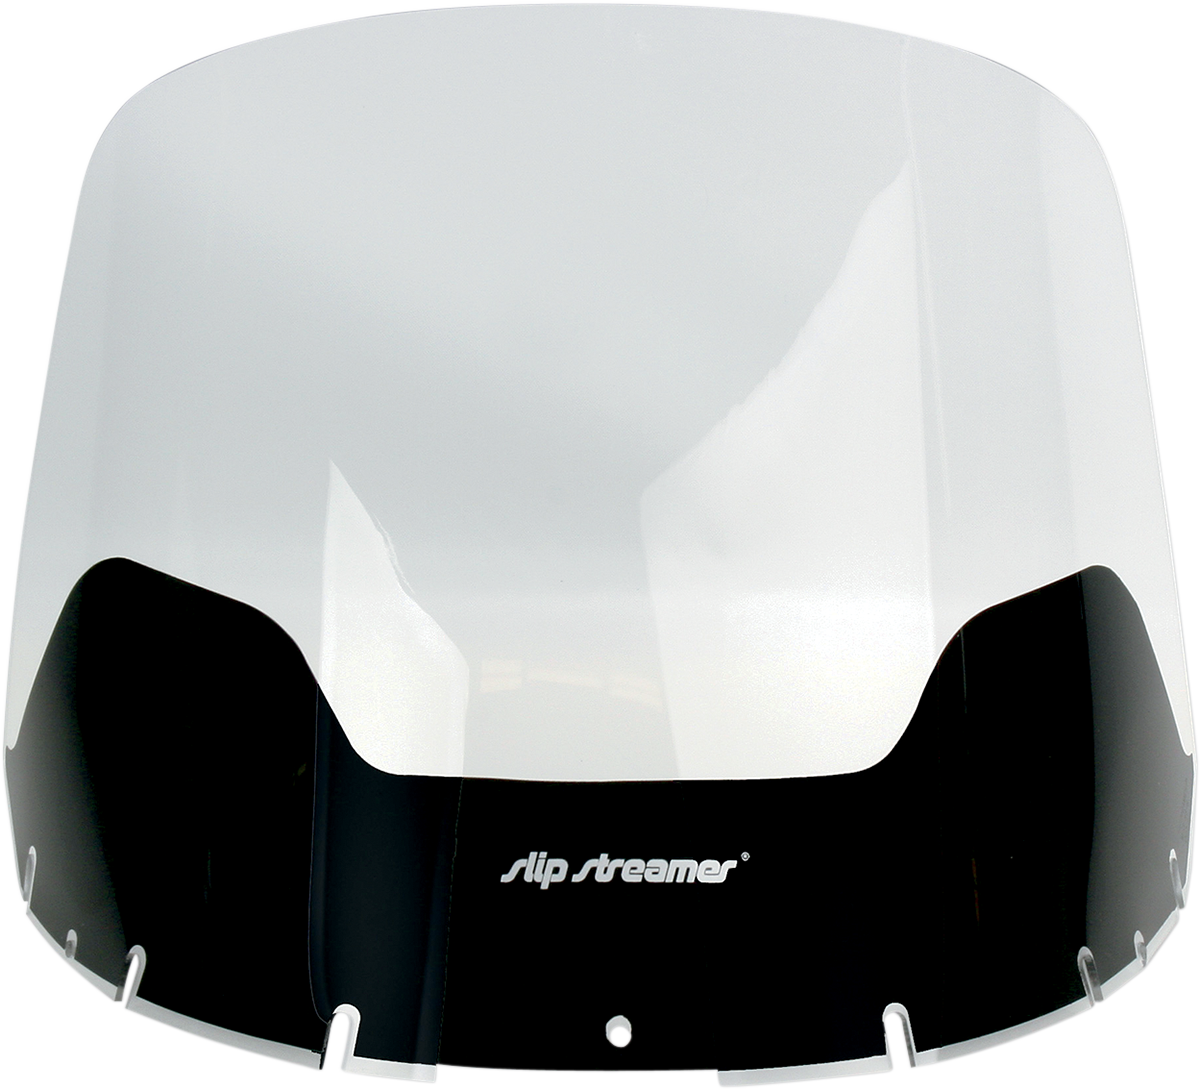 Slipstreamer 130 Series 19" Clear Motorcycle Windshield 1984-1995 Harley Touring